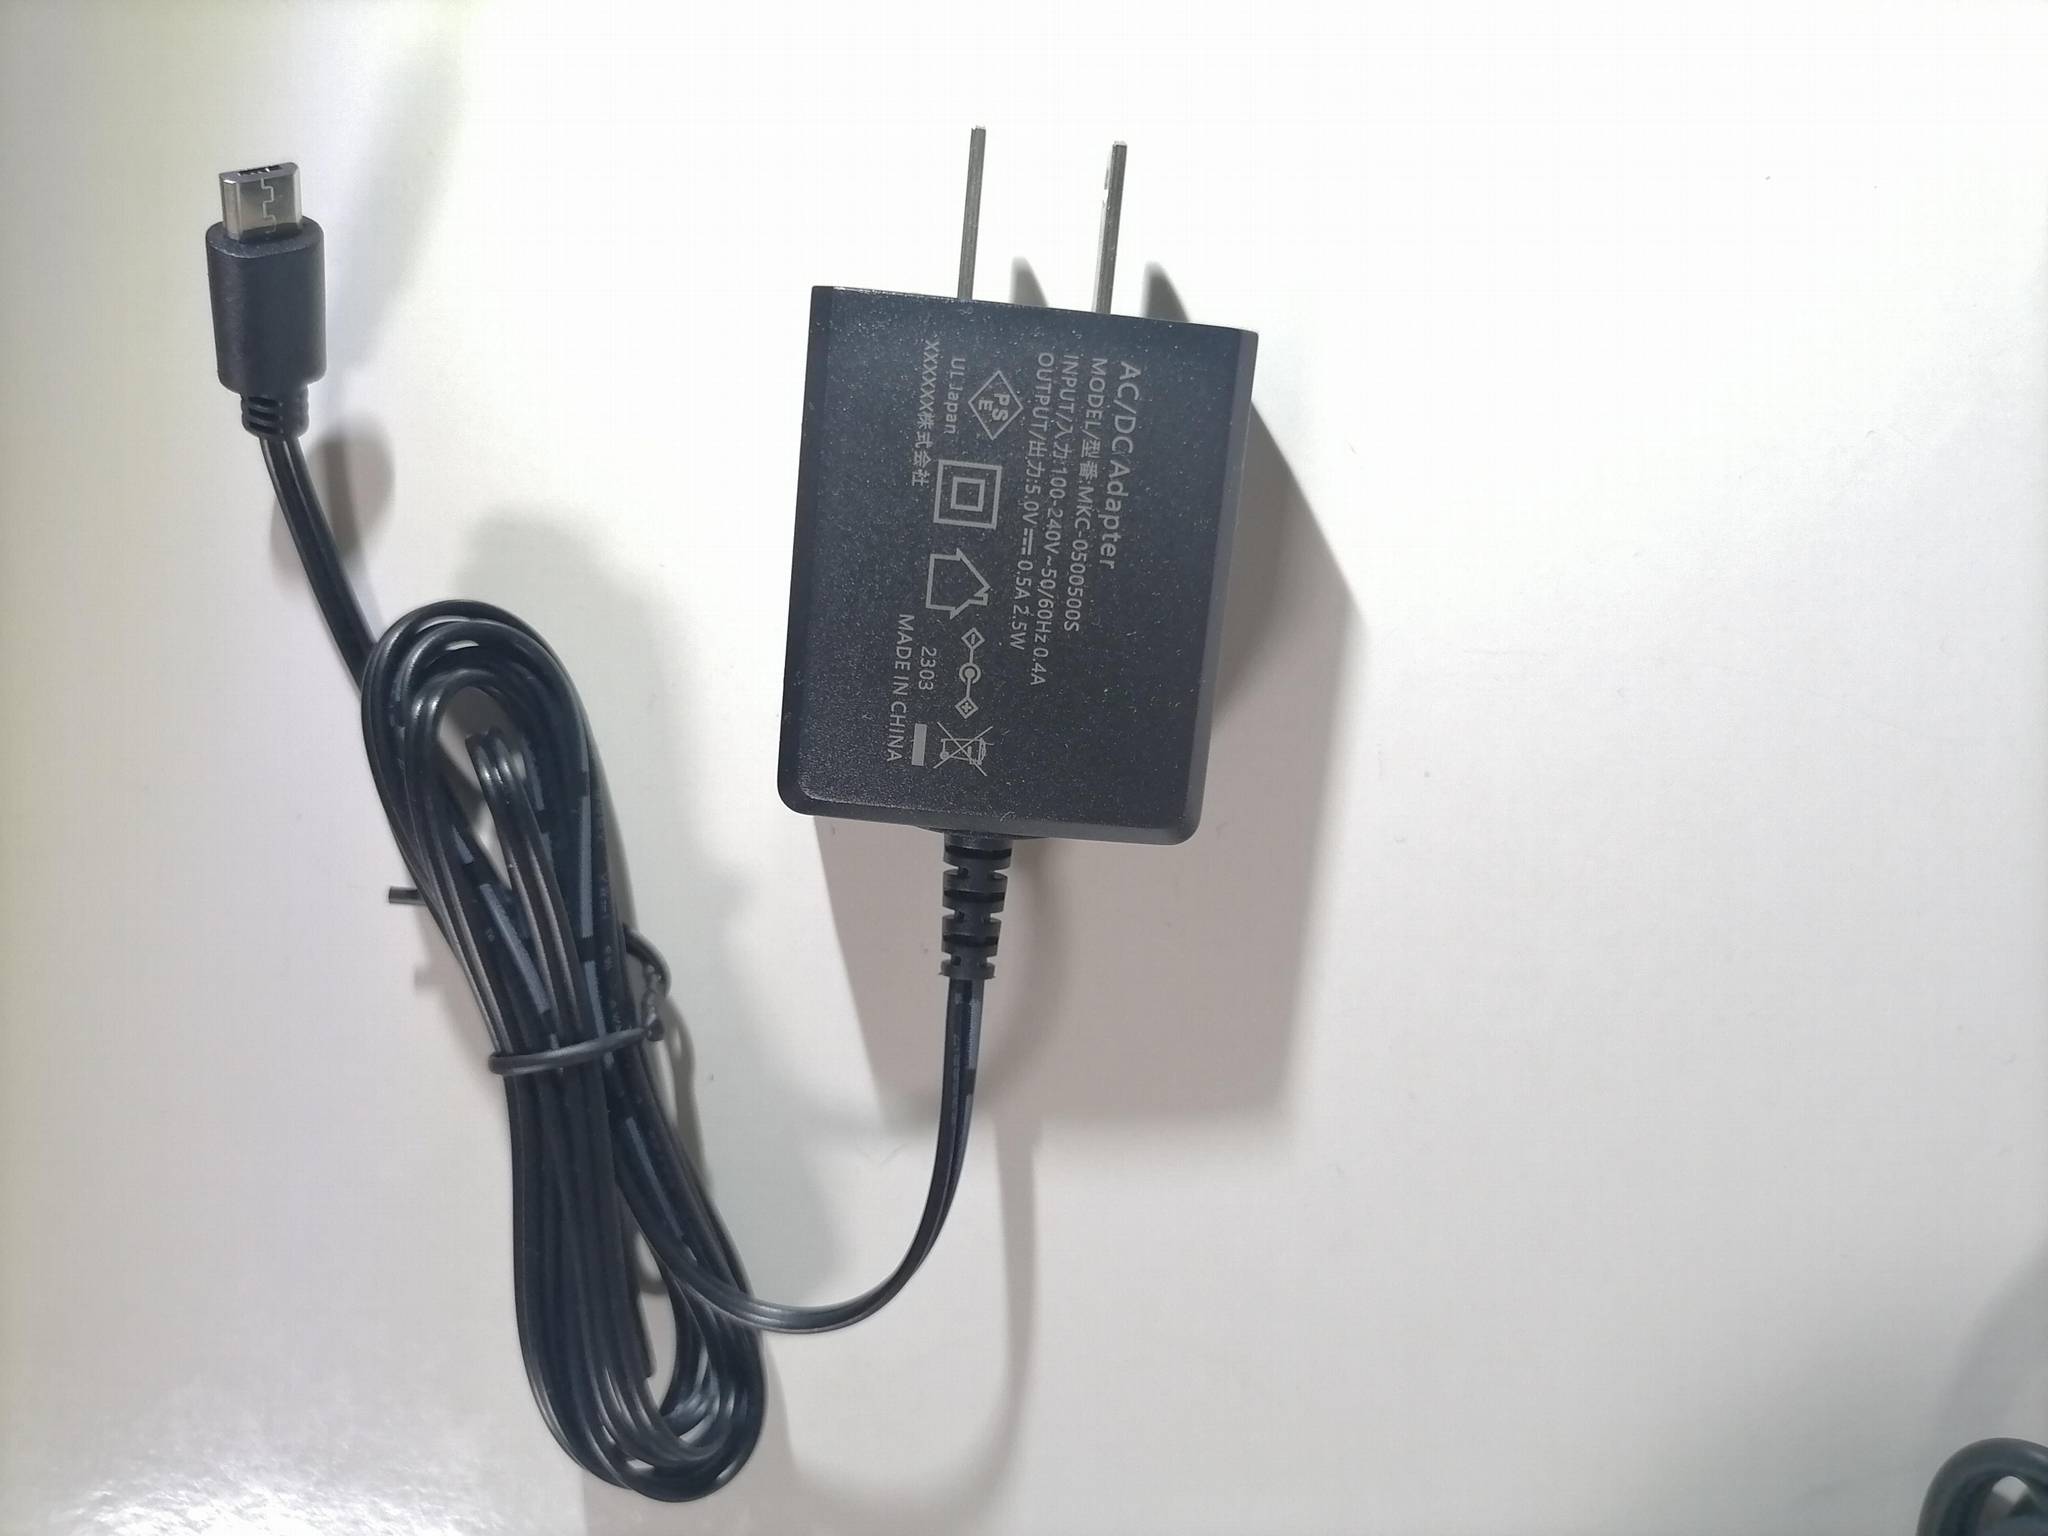 *Brand NEW* 5V 0.5A Merryking DC AC ADAPTHE MKS-0500500S POWER Supply